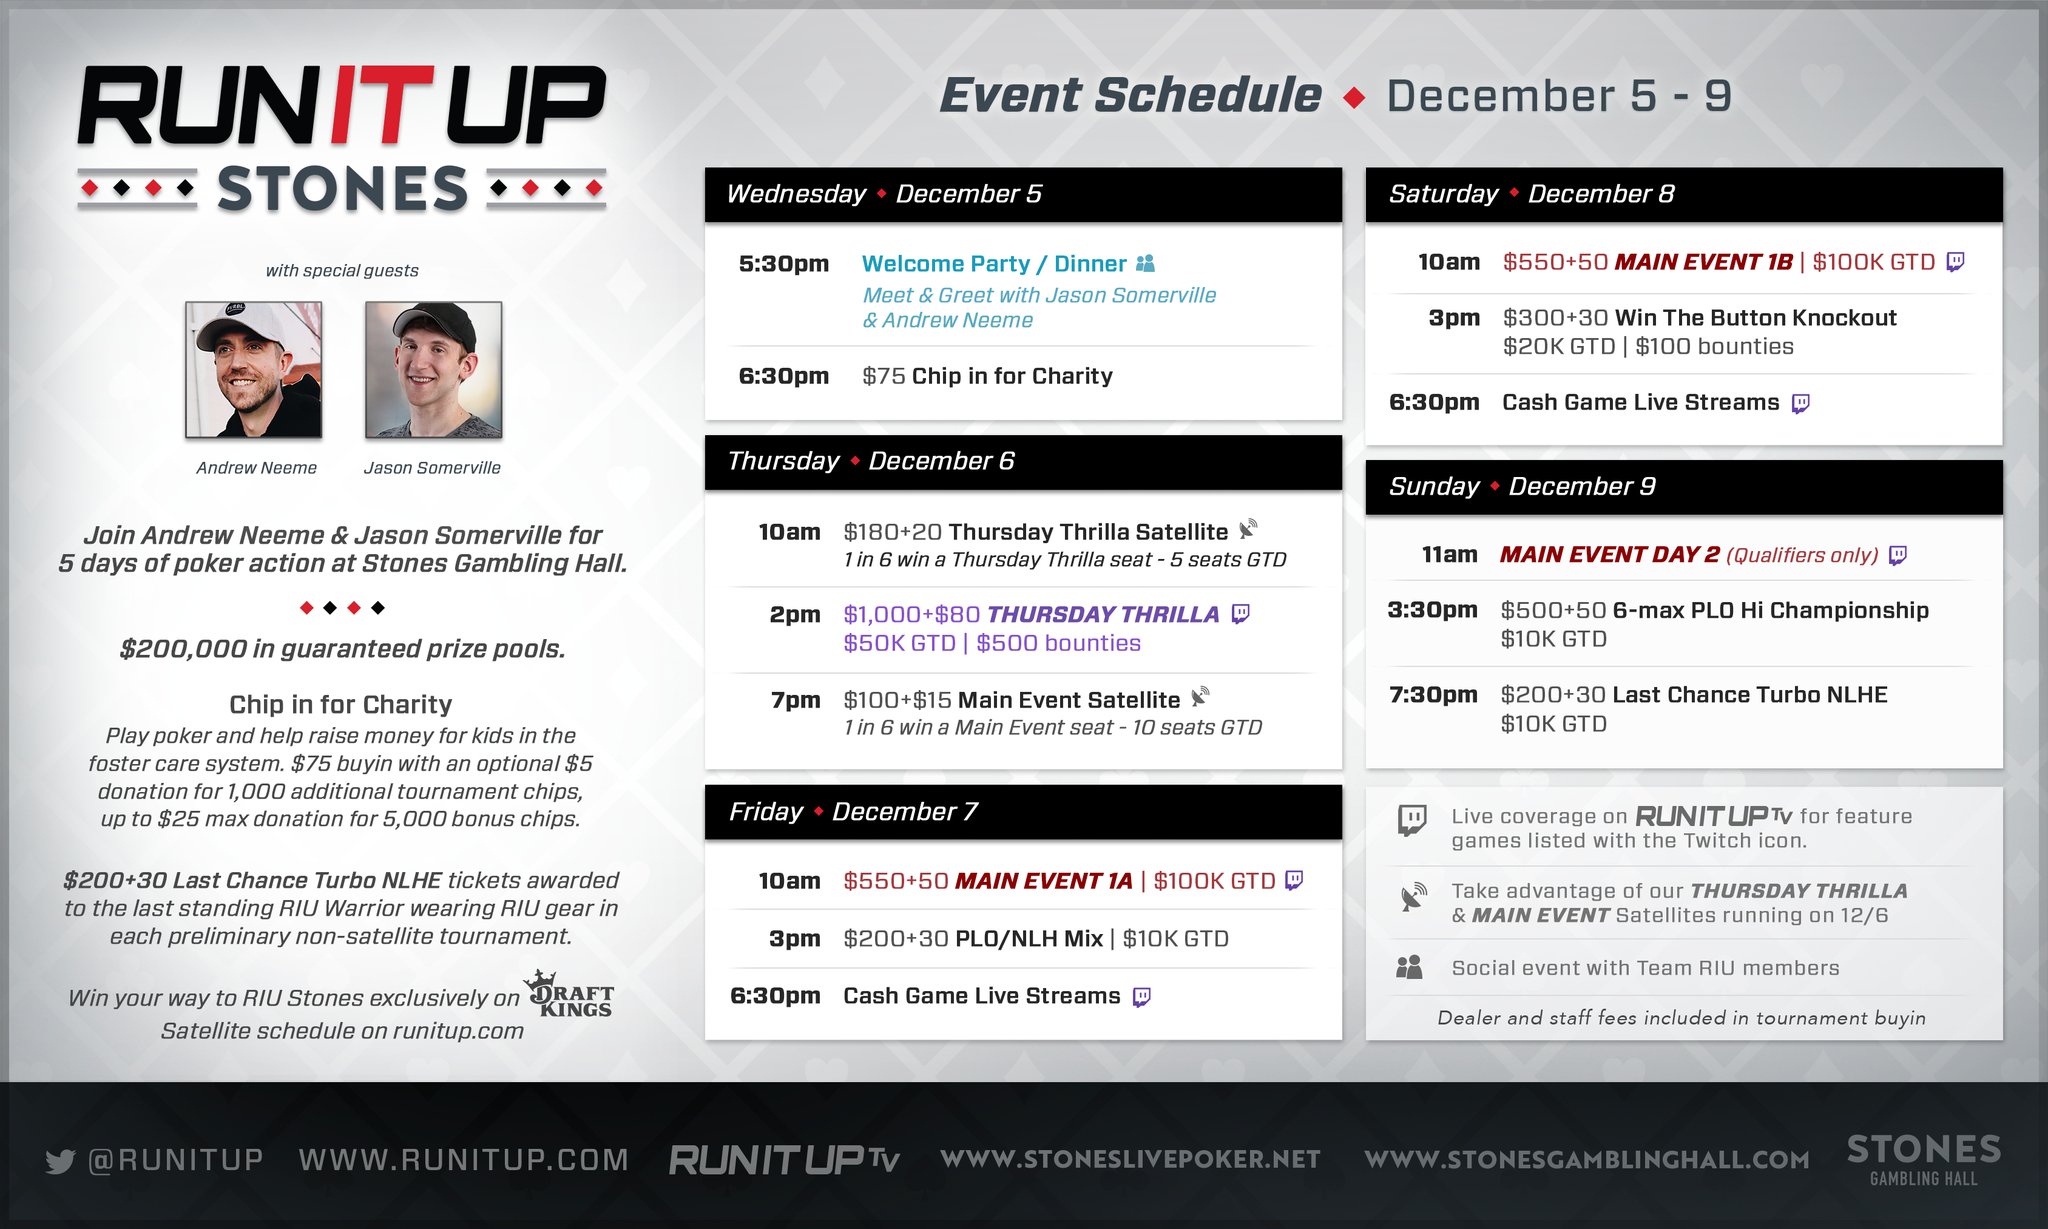 Next Run It Up Poker Event Happening in December at Stones Gambling Hall in California